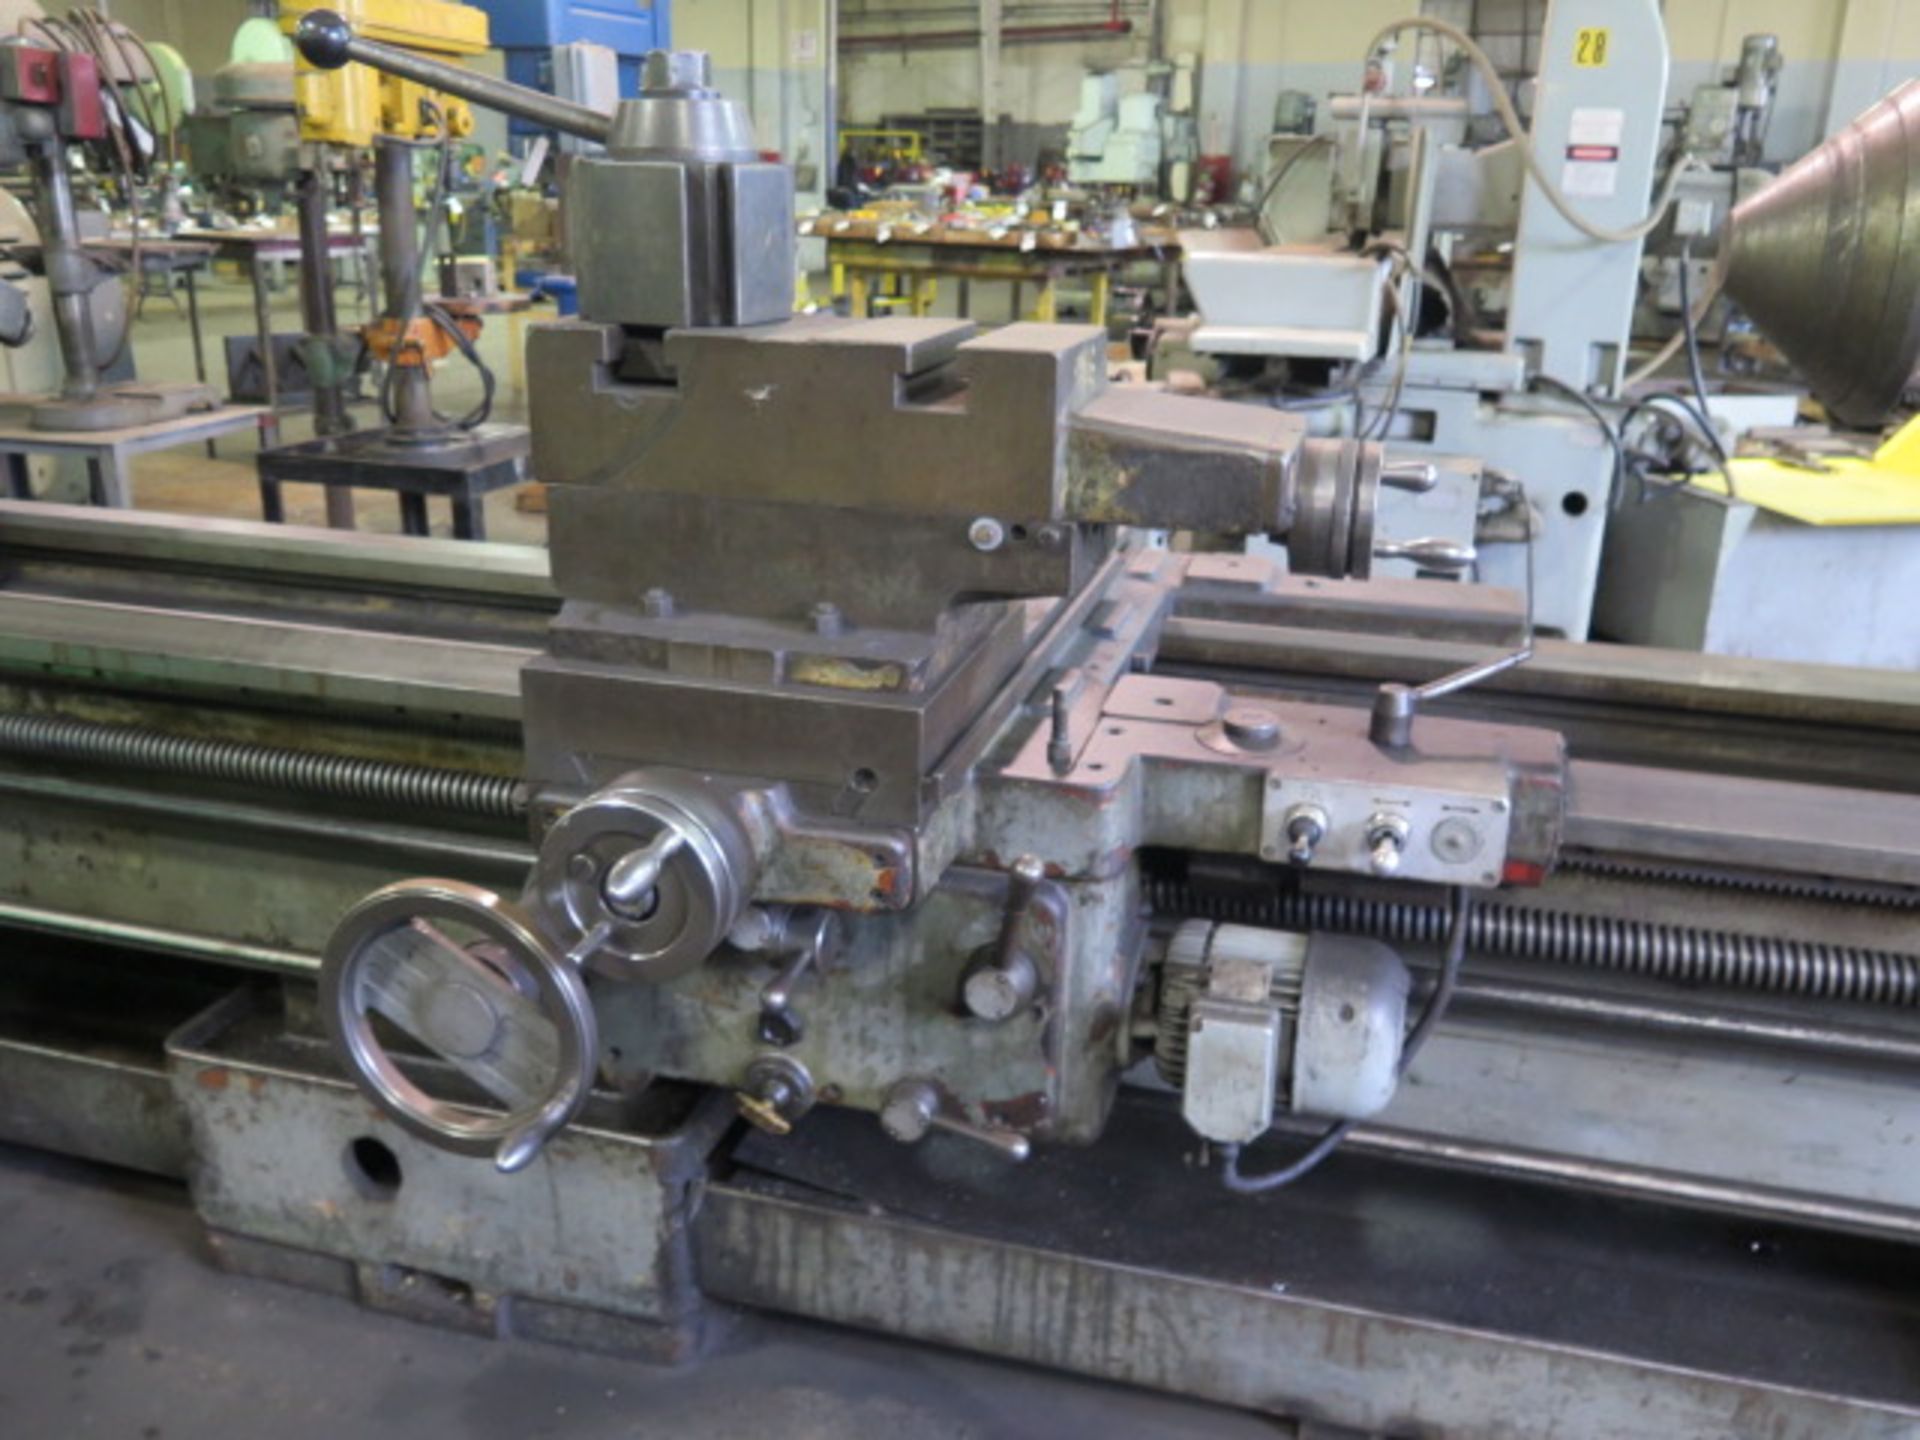 PBR TM-500 Big Bore Gap Lathe w/90-800 RPM, 5 7/8” Spindle Bore, Taper Attach, Inch/mm, SOLD AS IS - Image 11 of 21